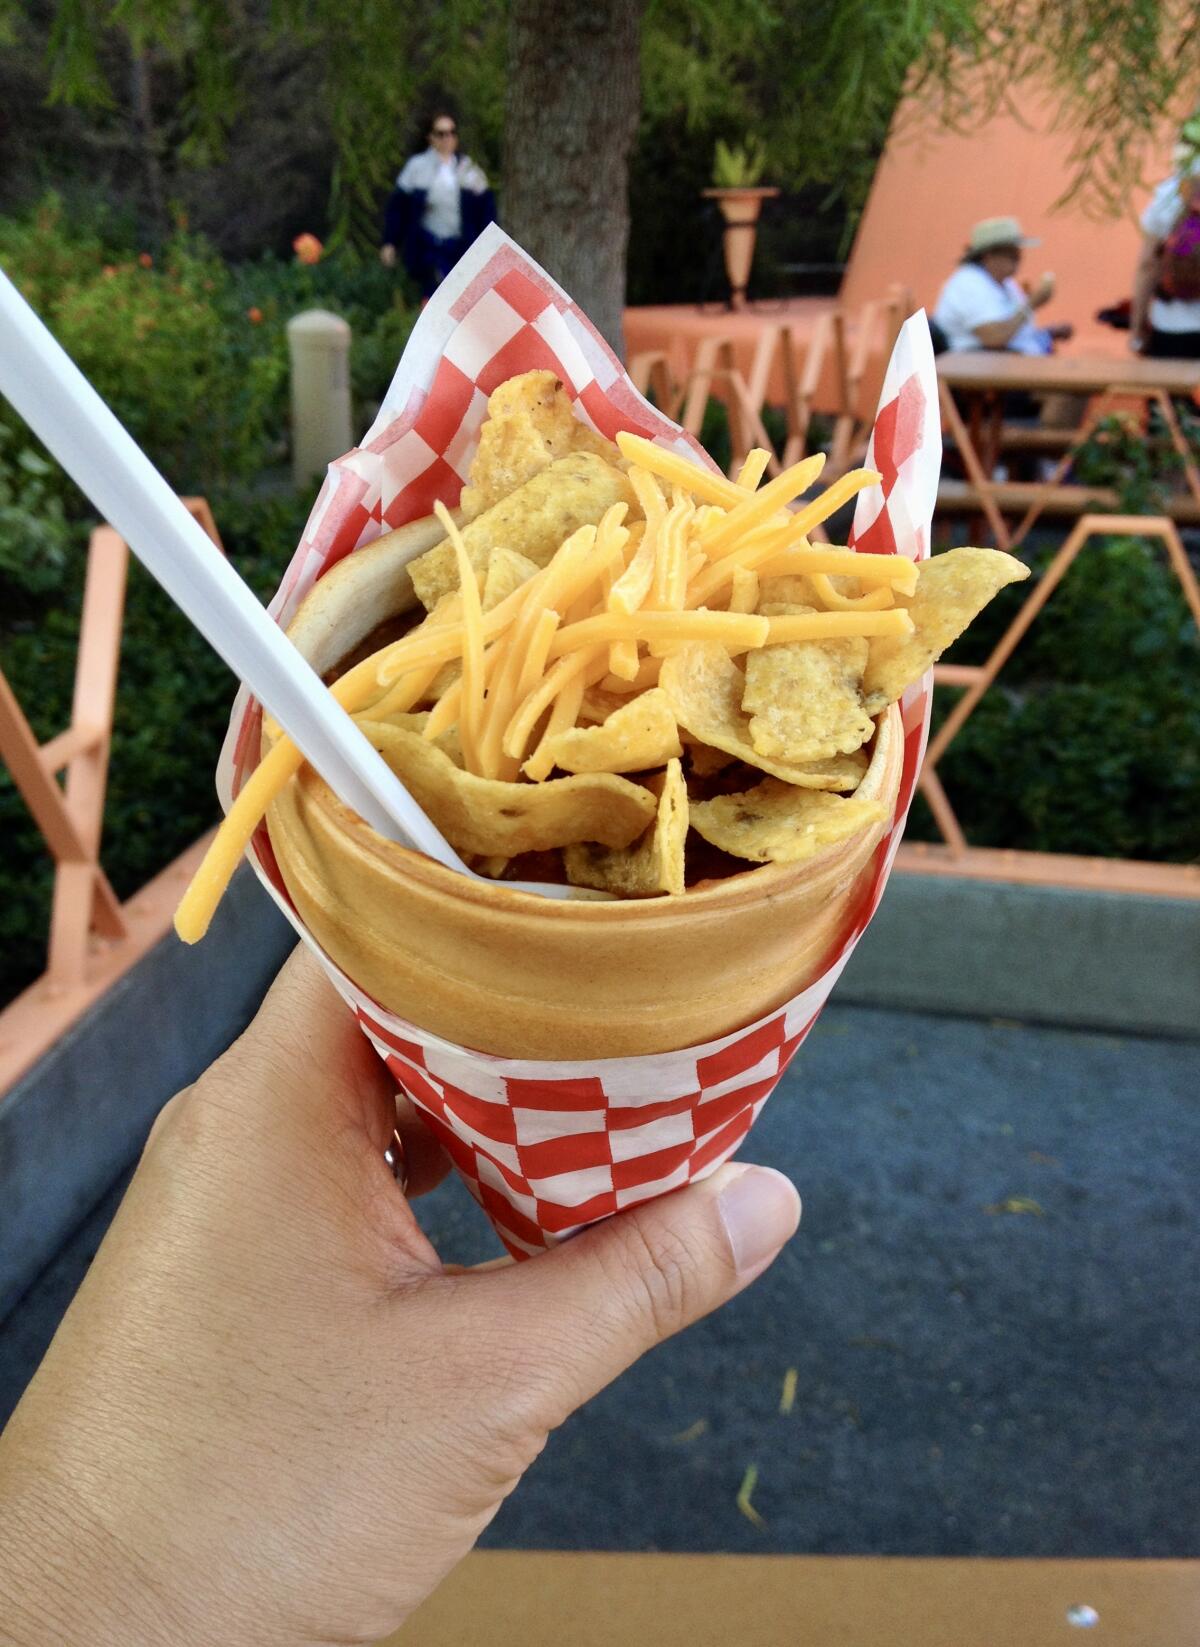 The Chili Cone Queso from Cozy Cone Motel Snacks for $9.99 is a dish that's as fun-filled as it is pun-filled.